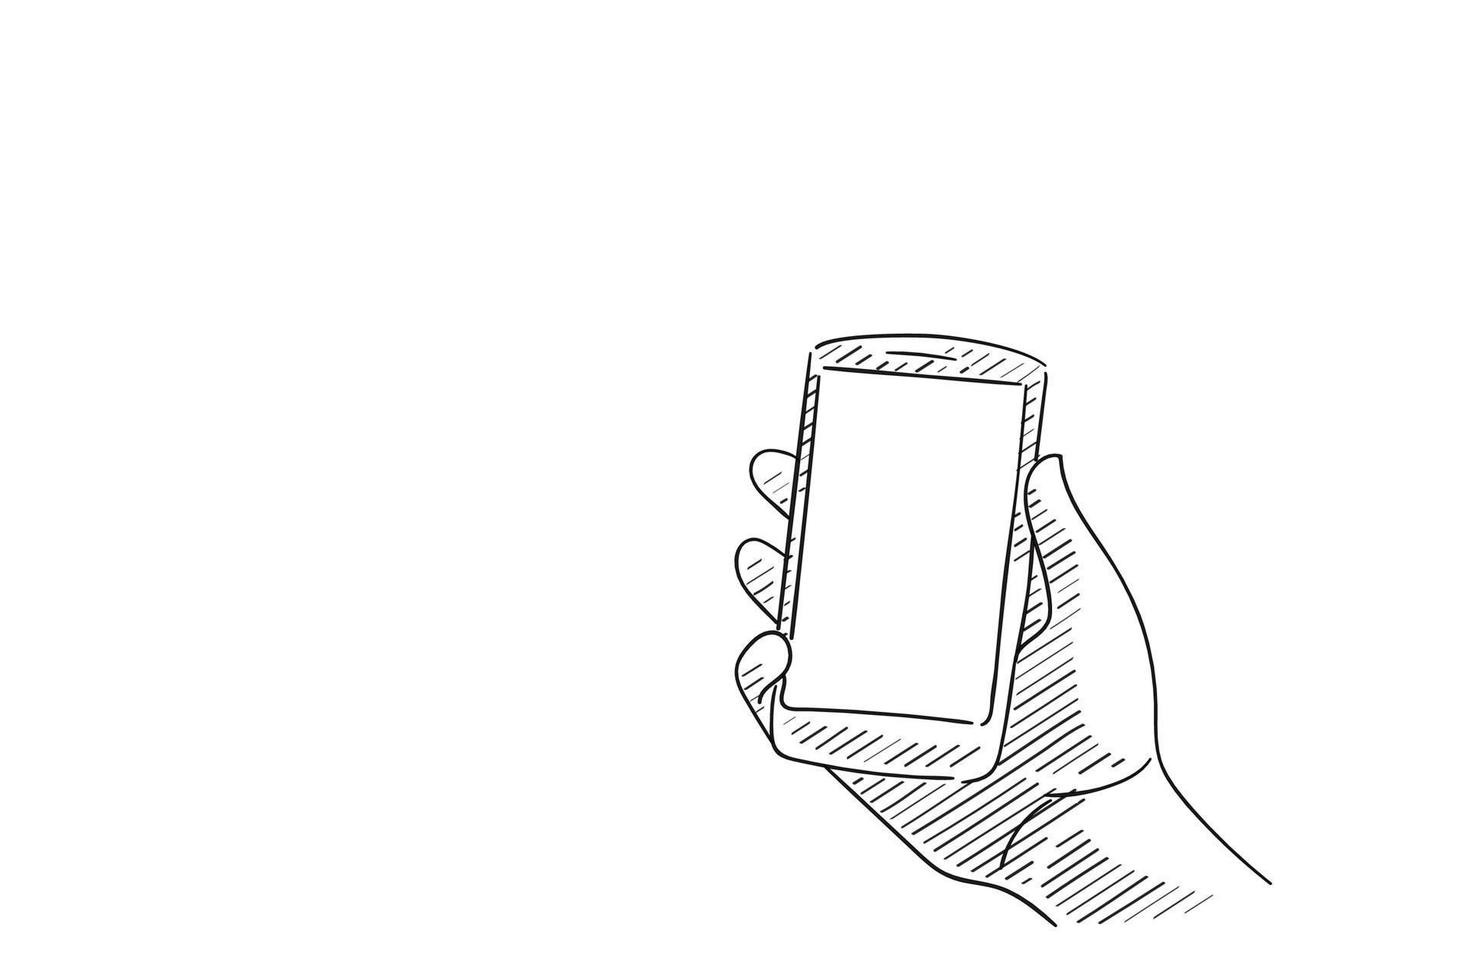 Mobile phone in hand. Sketch of human hand which is holding empty smartphone. Vector illustration design